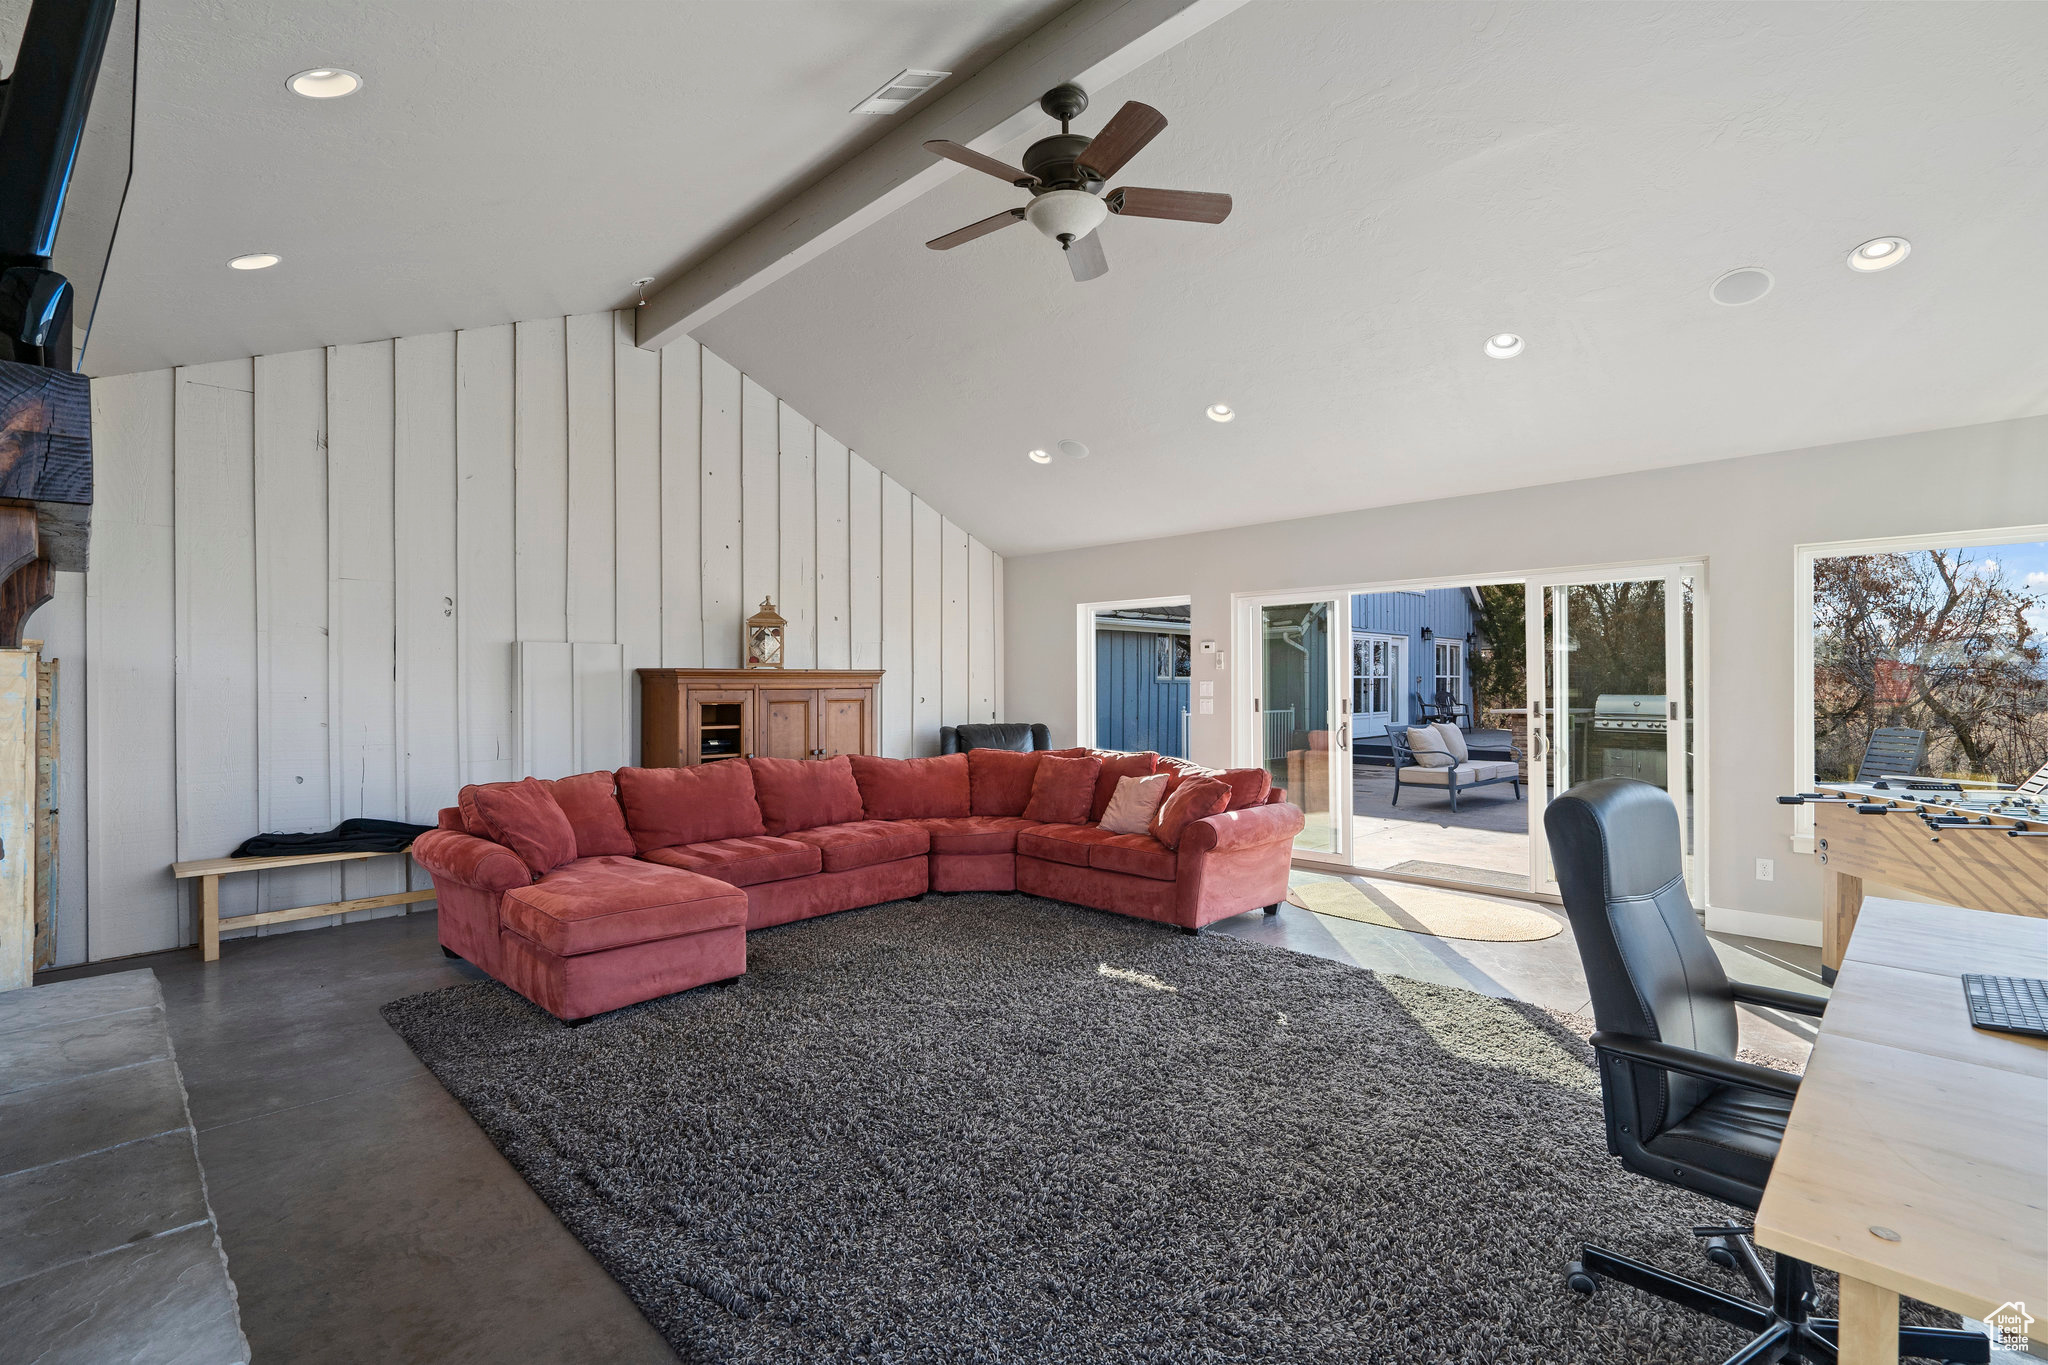 Enjoy close to 600 square feet of entertaining or gathering space in this cozy sunroom behind the garage on the north side of the home.